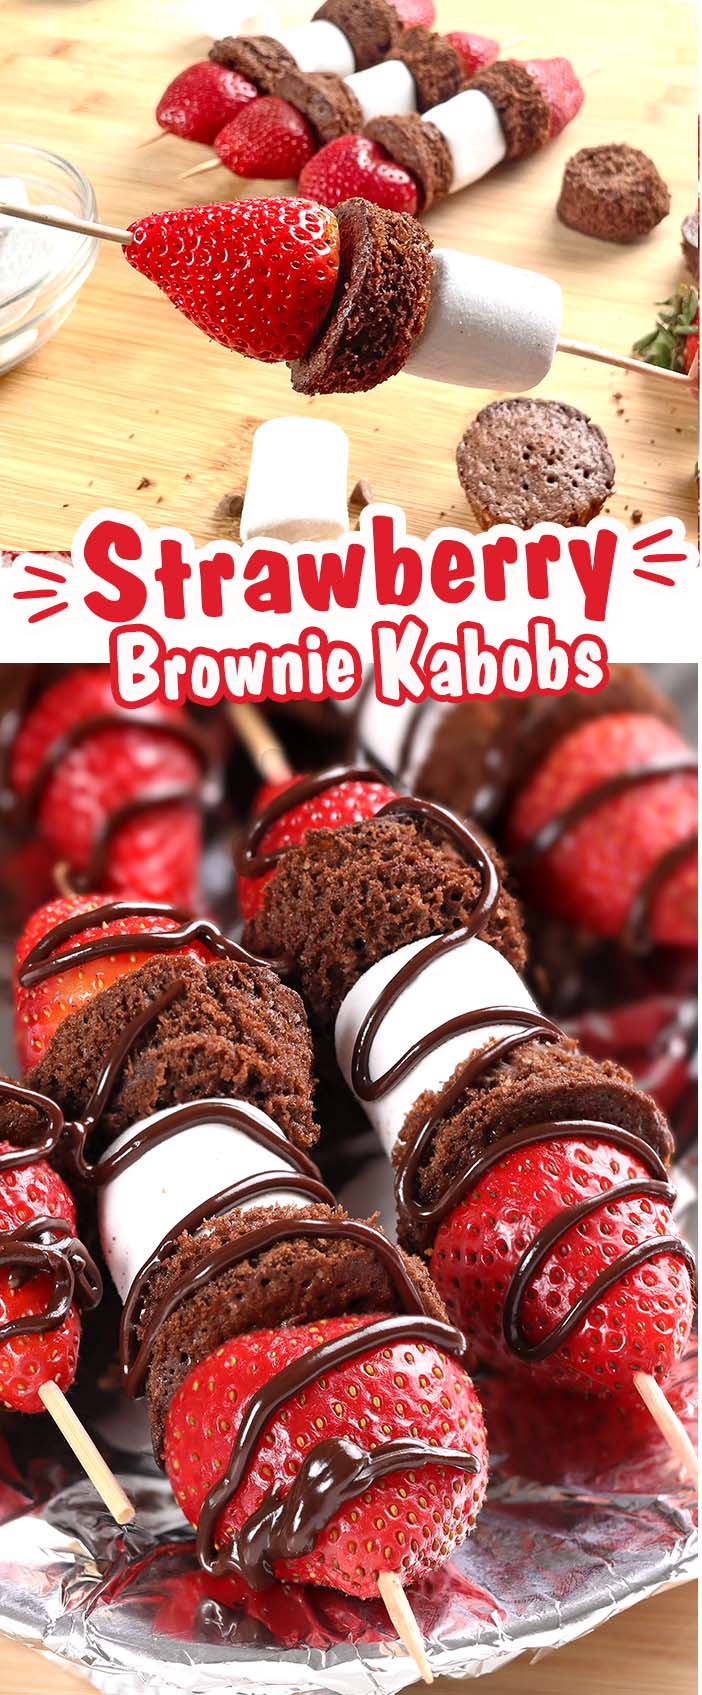 These Strawberry Brownie kabobs are perfect for Holidays, Baby showers, themed events, or any other time you get the hankering to stick brownie bites, marshmallows, and fruit on a skewer, and drizzle with chocolate. #holiday #4thJuly #babyshower